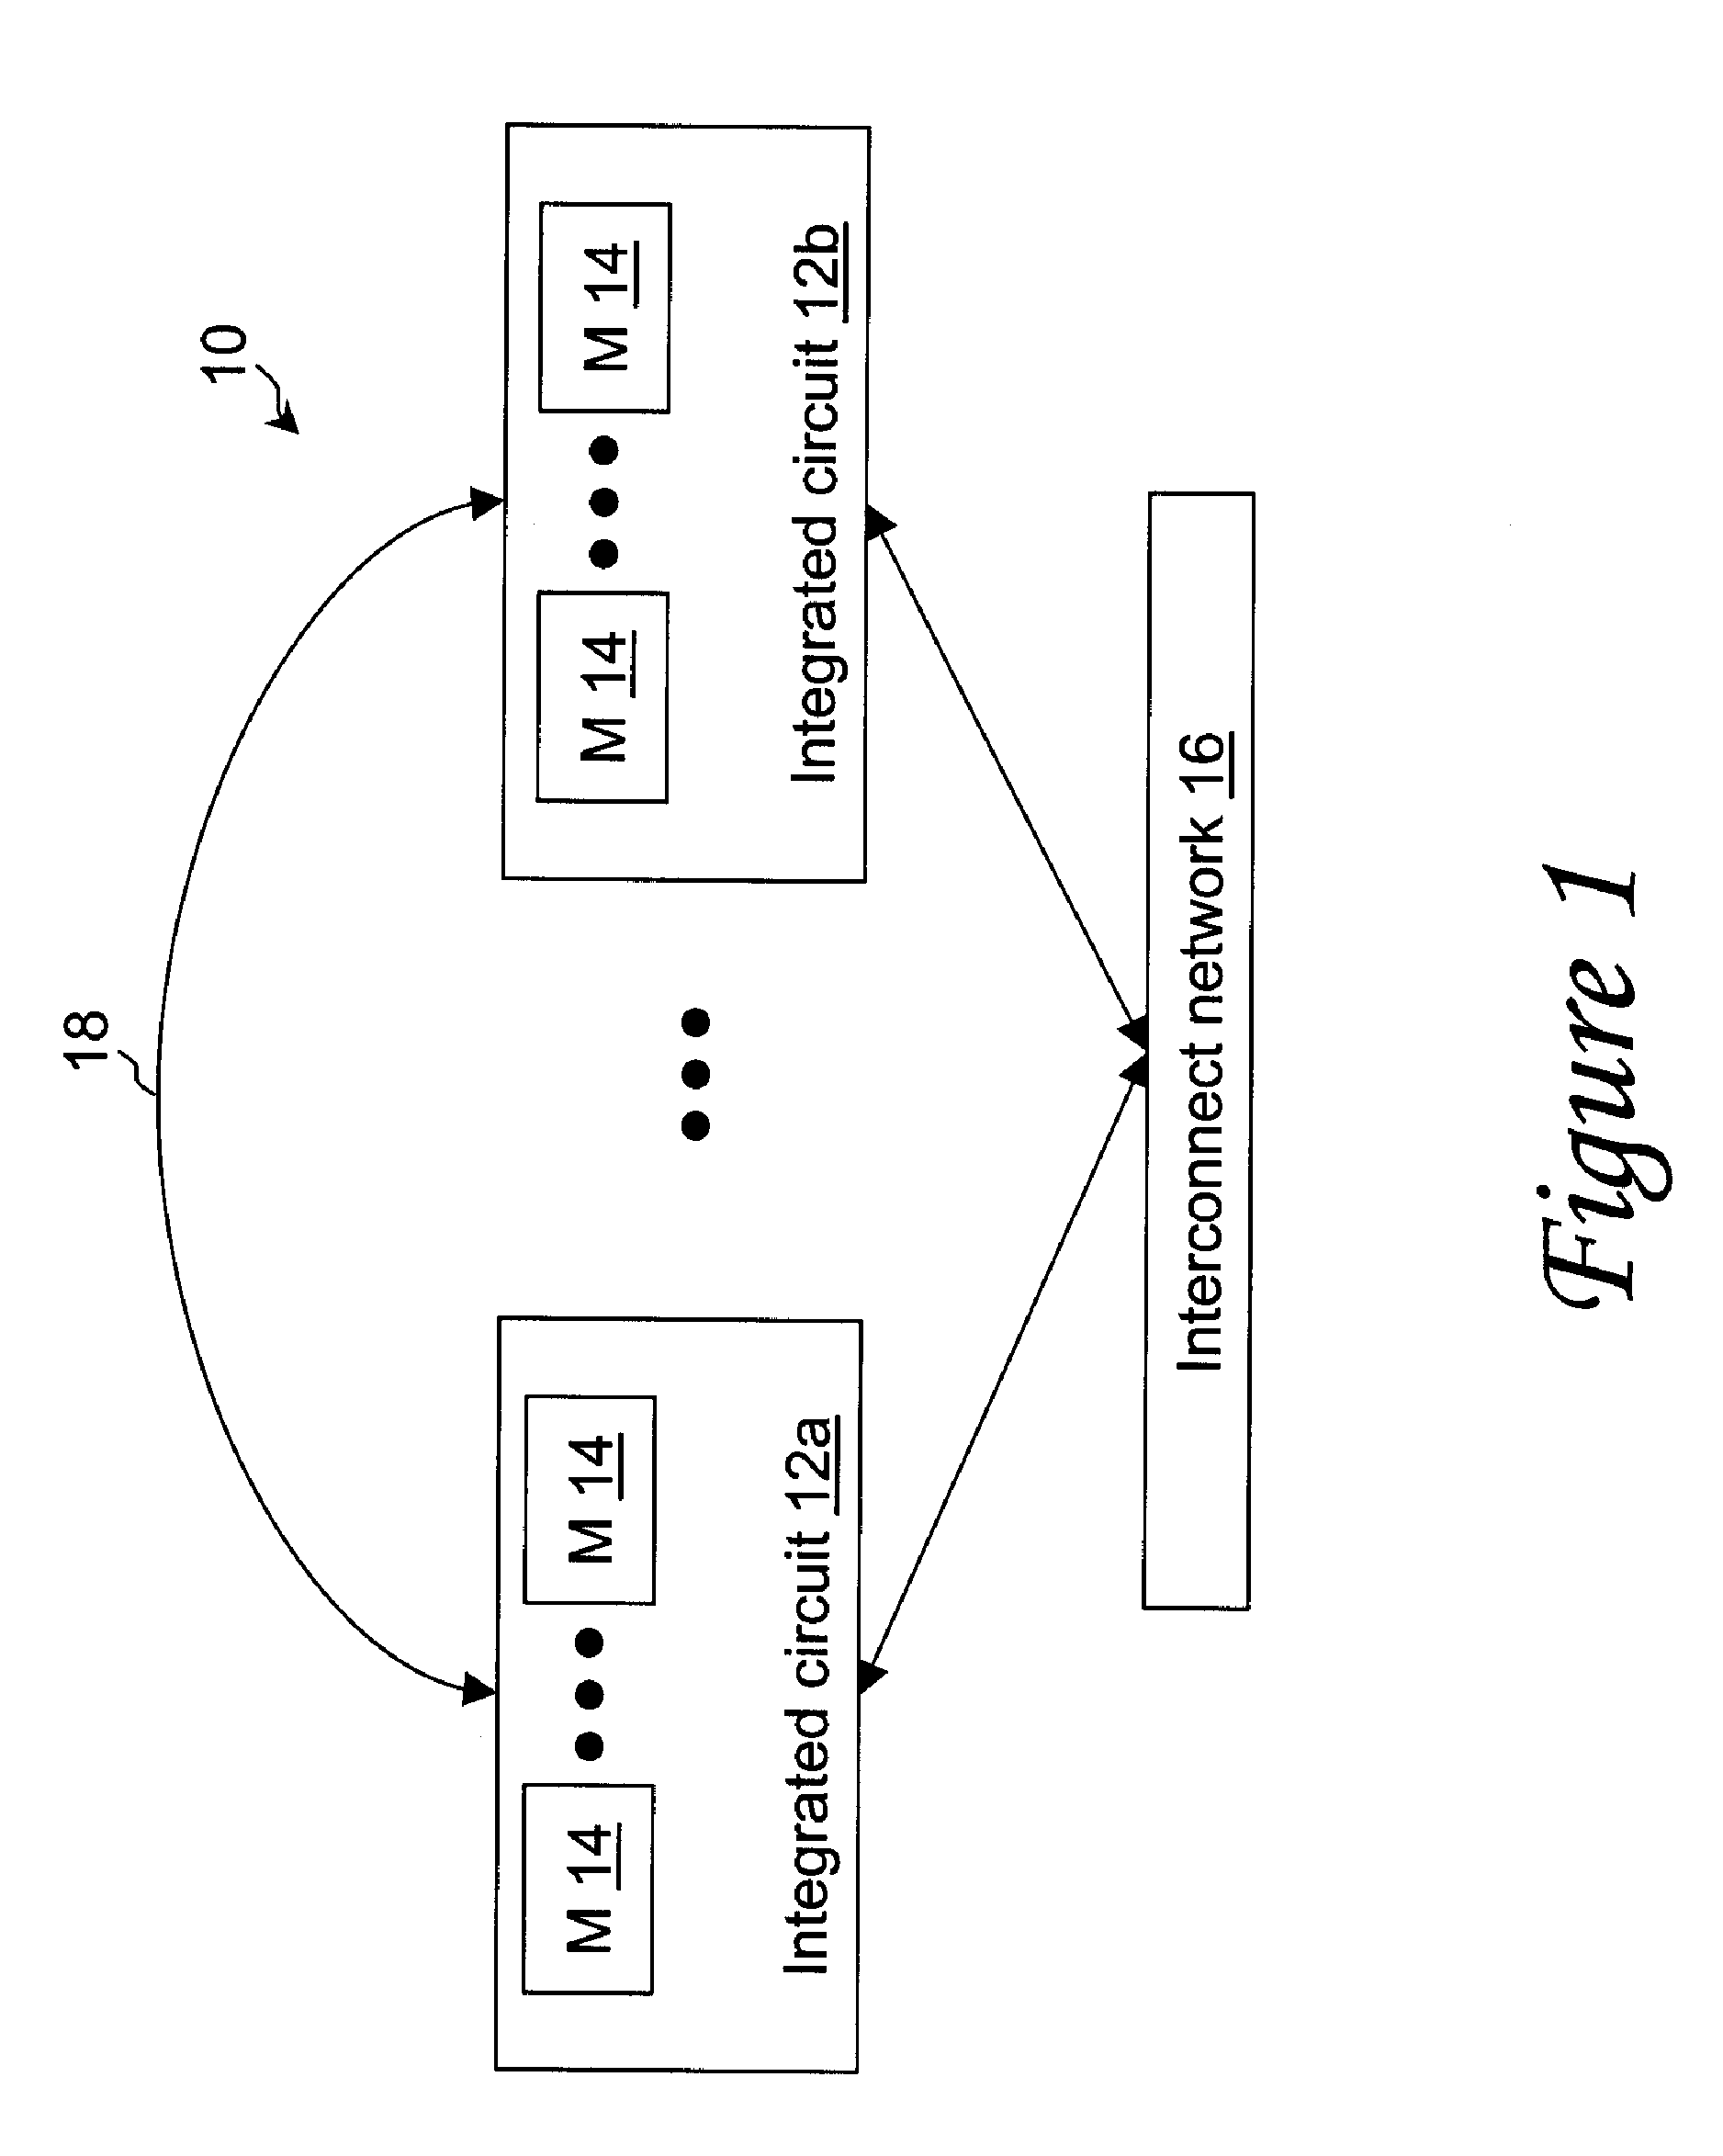 Method, system and apparatus for aggregating failures across multiple memories and applying a common defect repair solution to all of the multiple memories